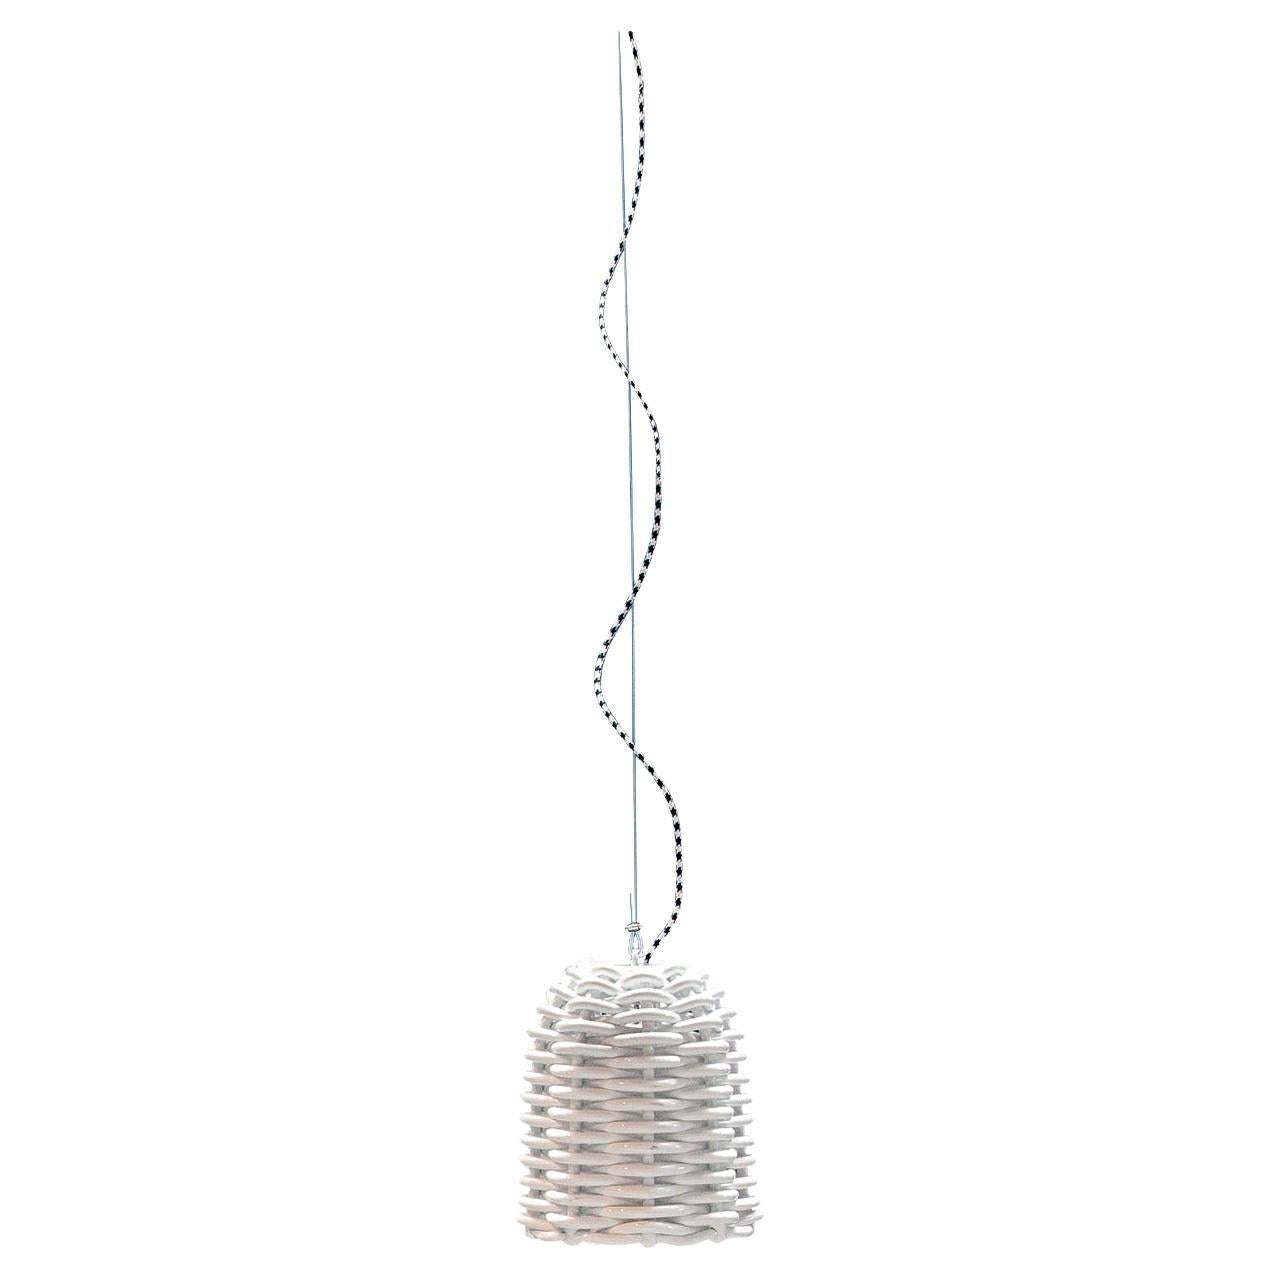 Gervasoni Sweet 91 Suspension Lamp in Woven Glossy White PVC by Paola Navone For Sale